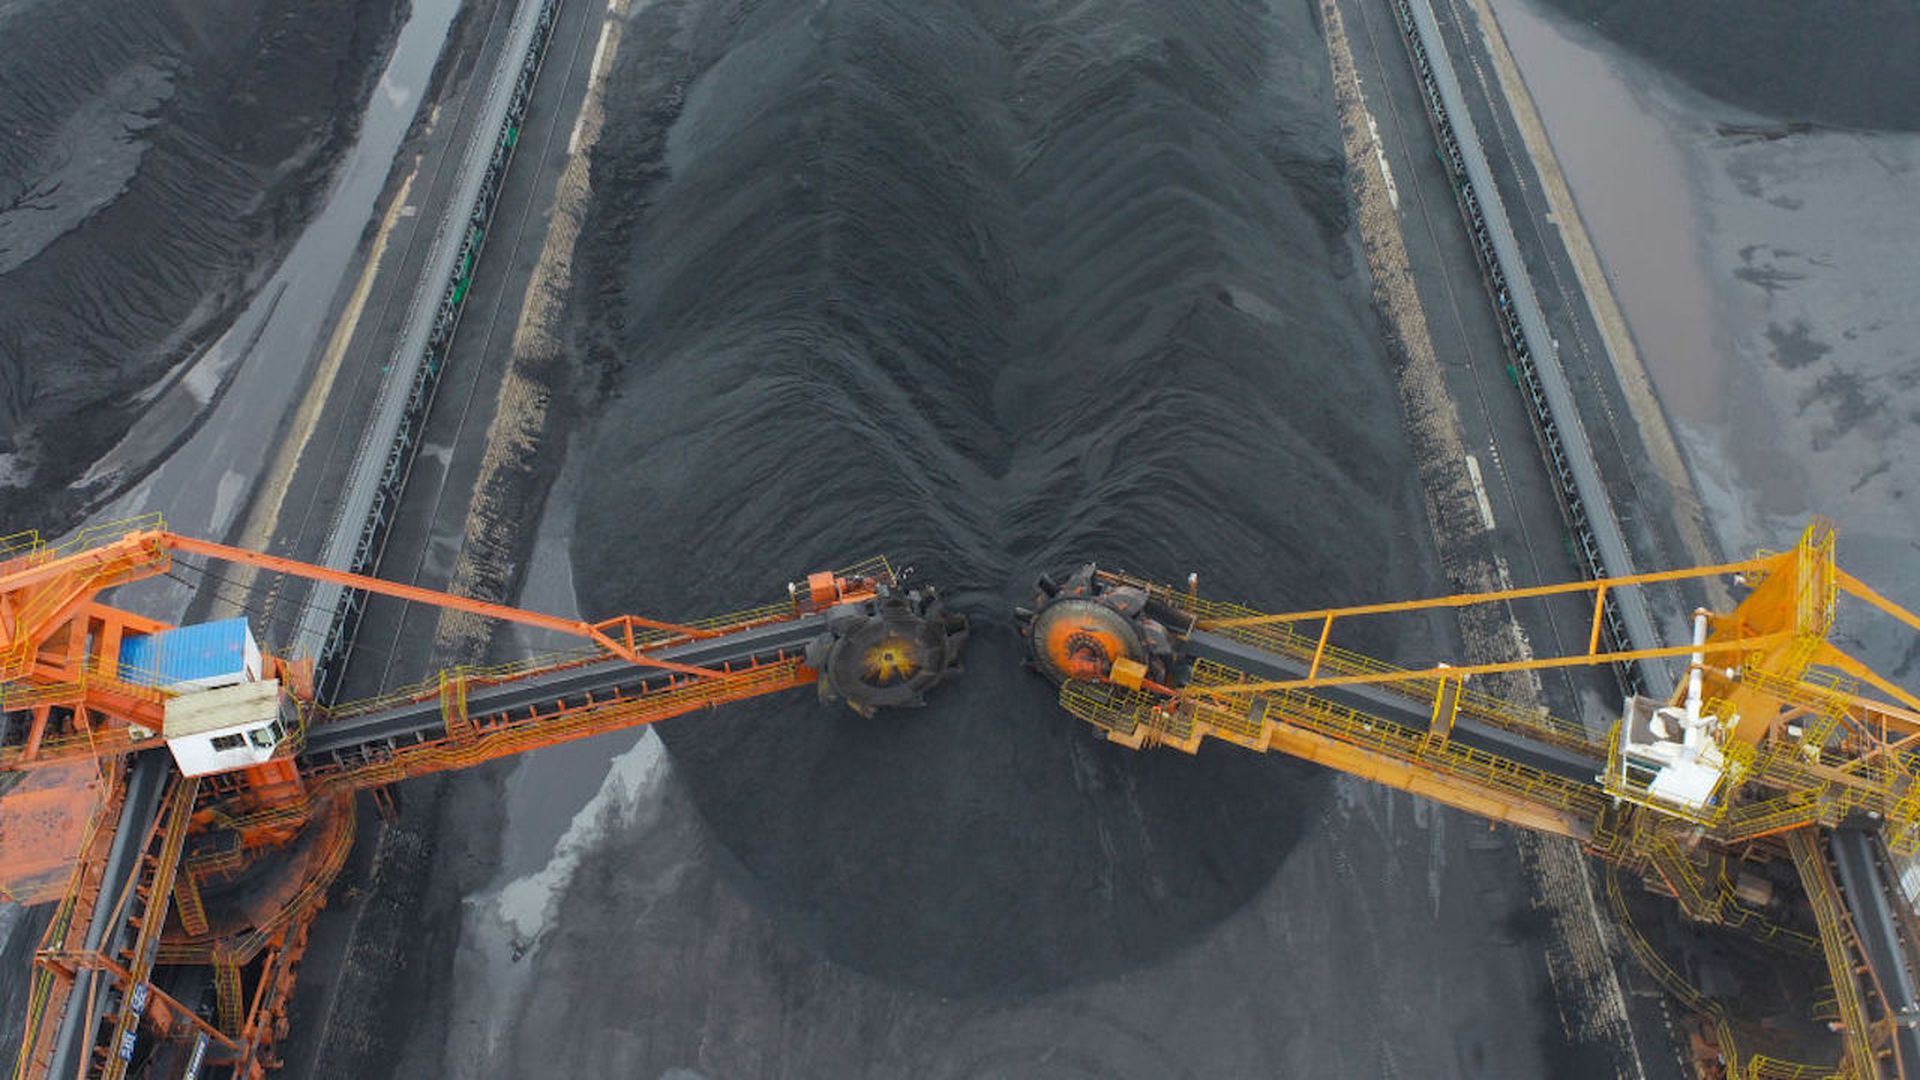 Aerial view of coal being unloaded from a cargo ship at Lianyungang port